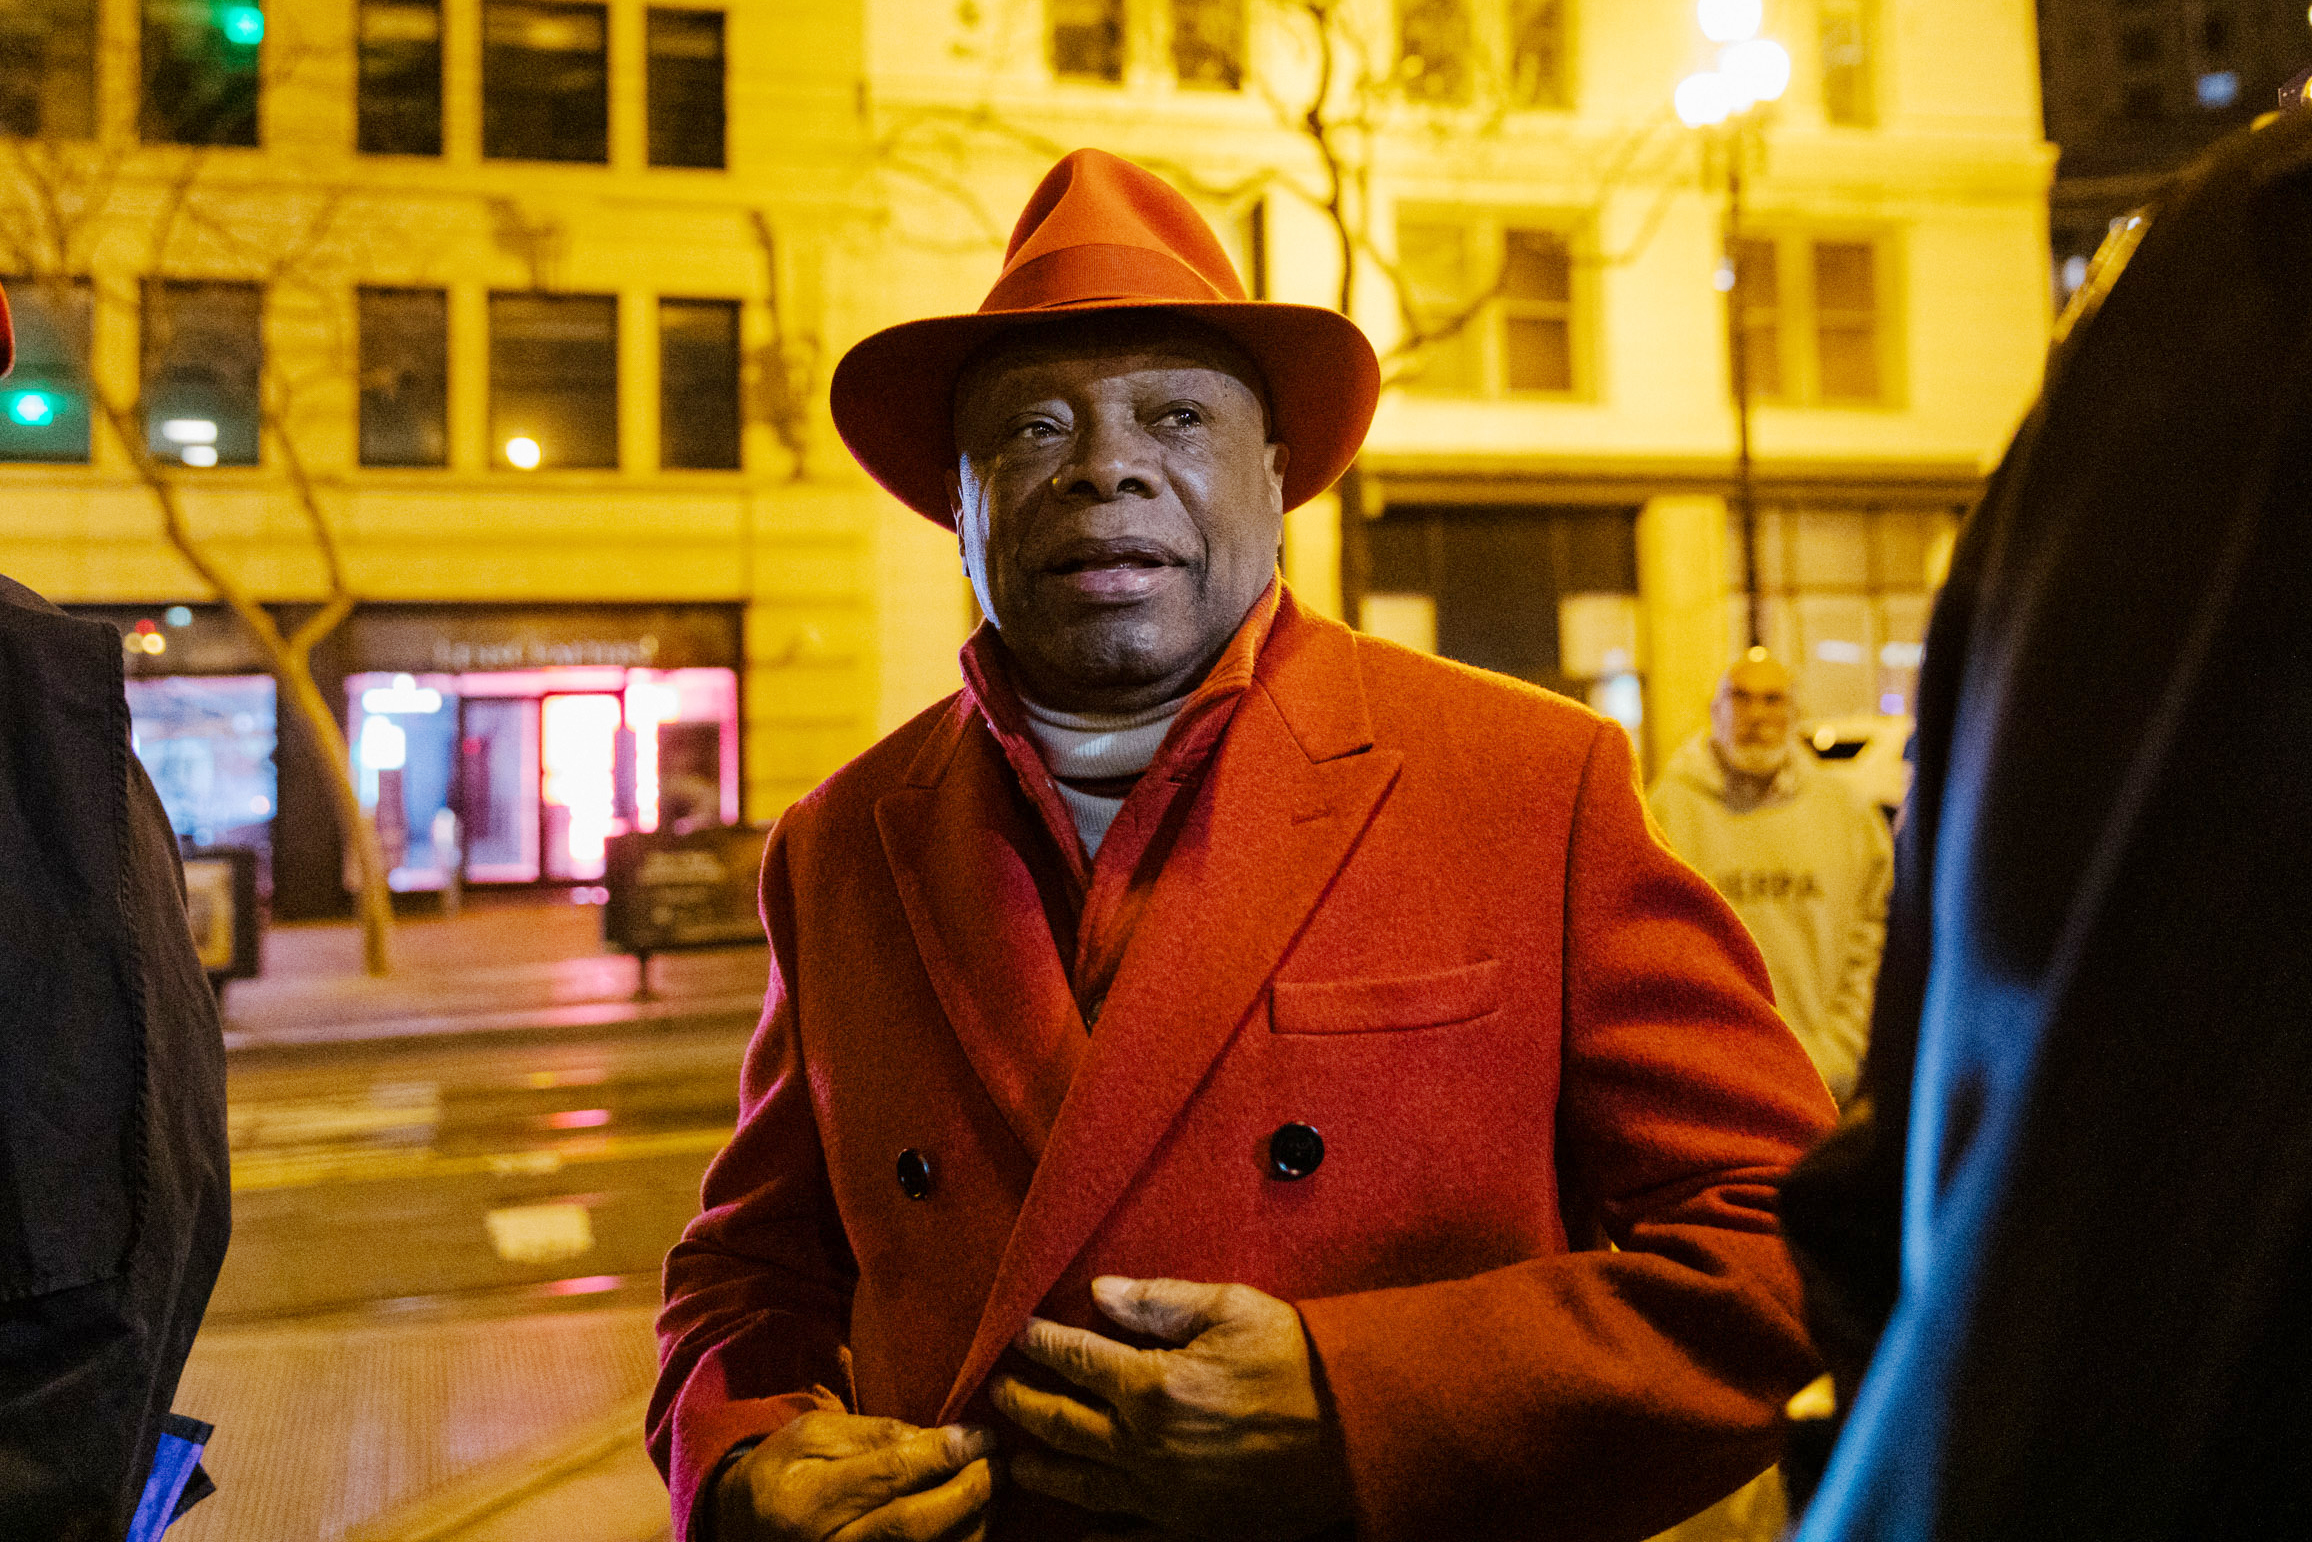 Willie Brown in a red suit and hat.